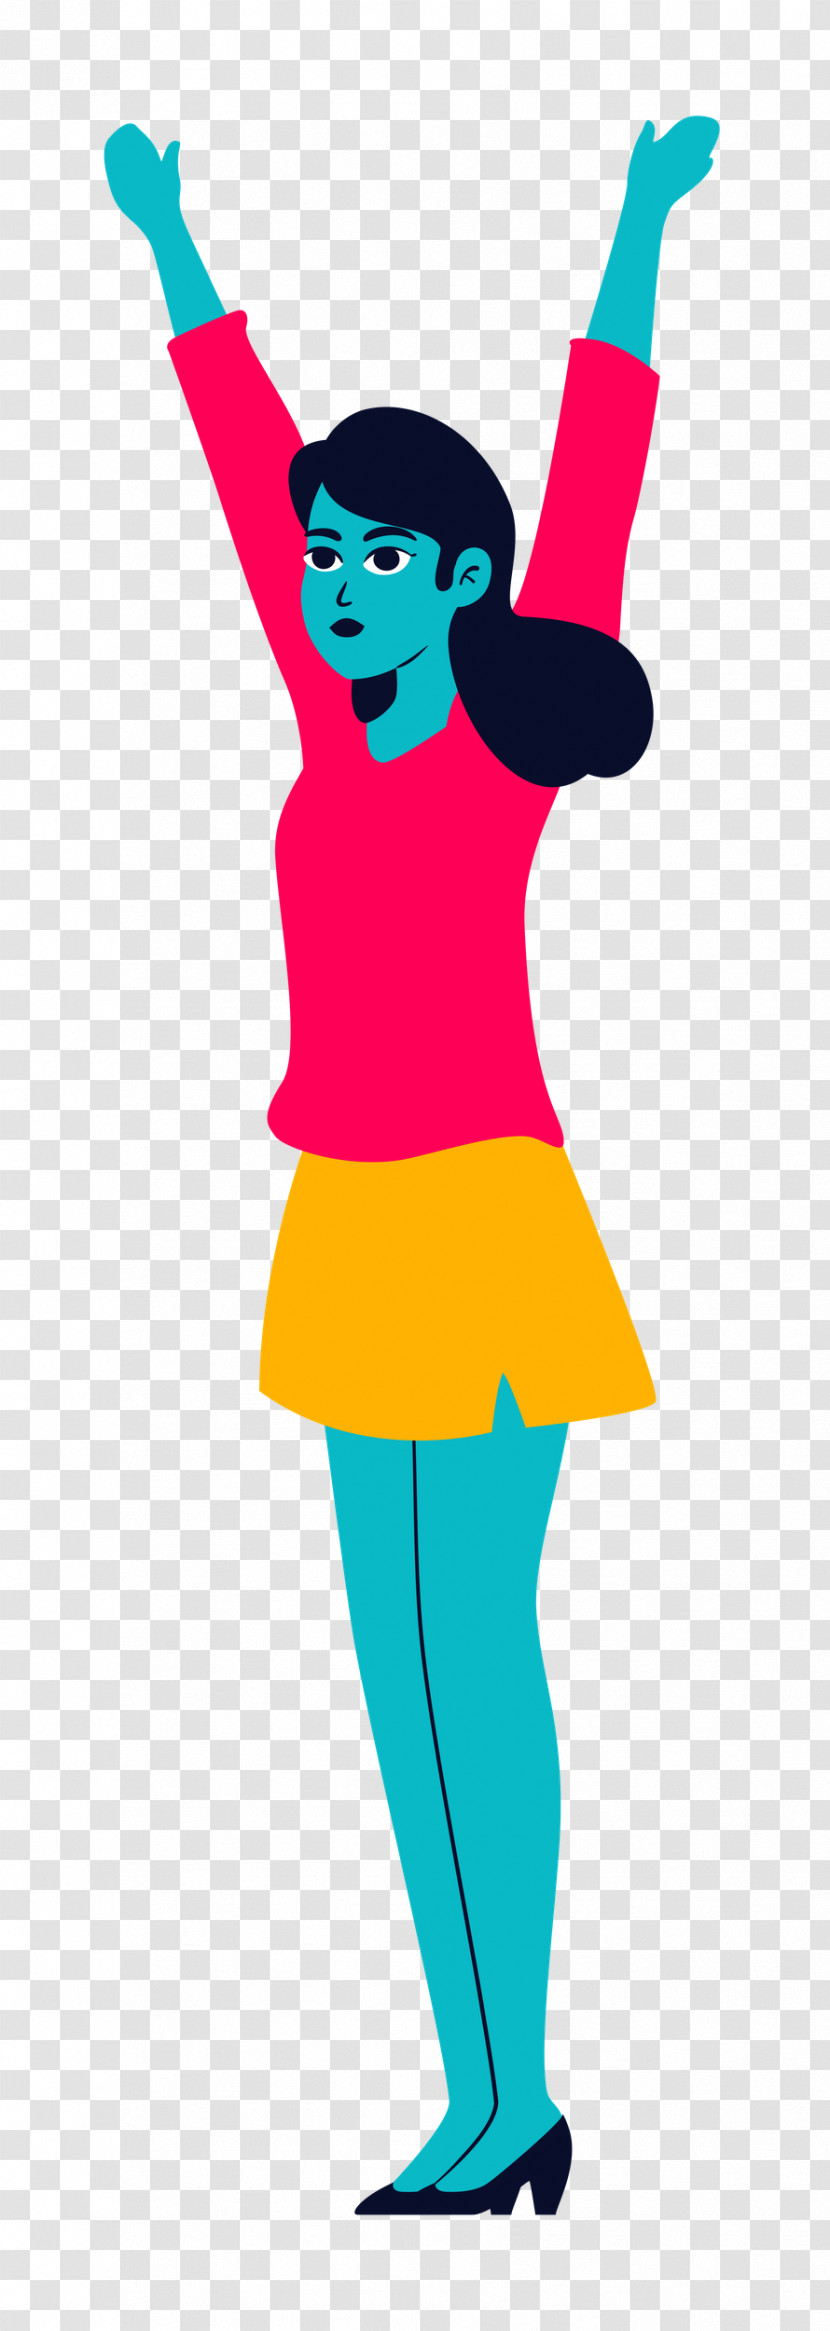 Cartoon Girly Girl Icon Fashion Transparent PNG